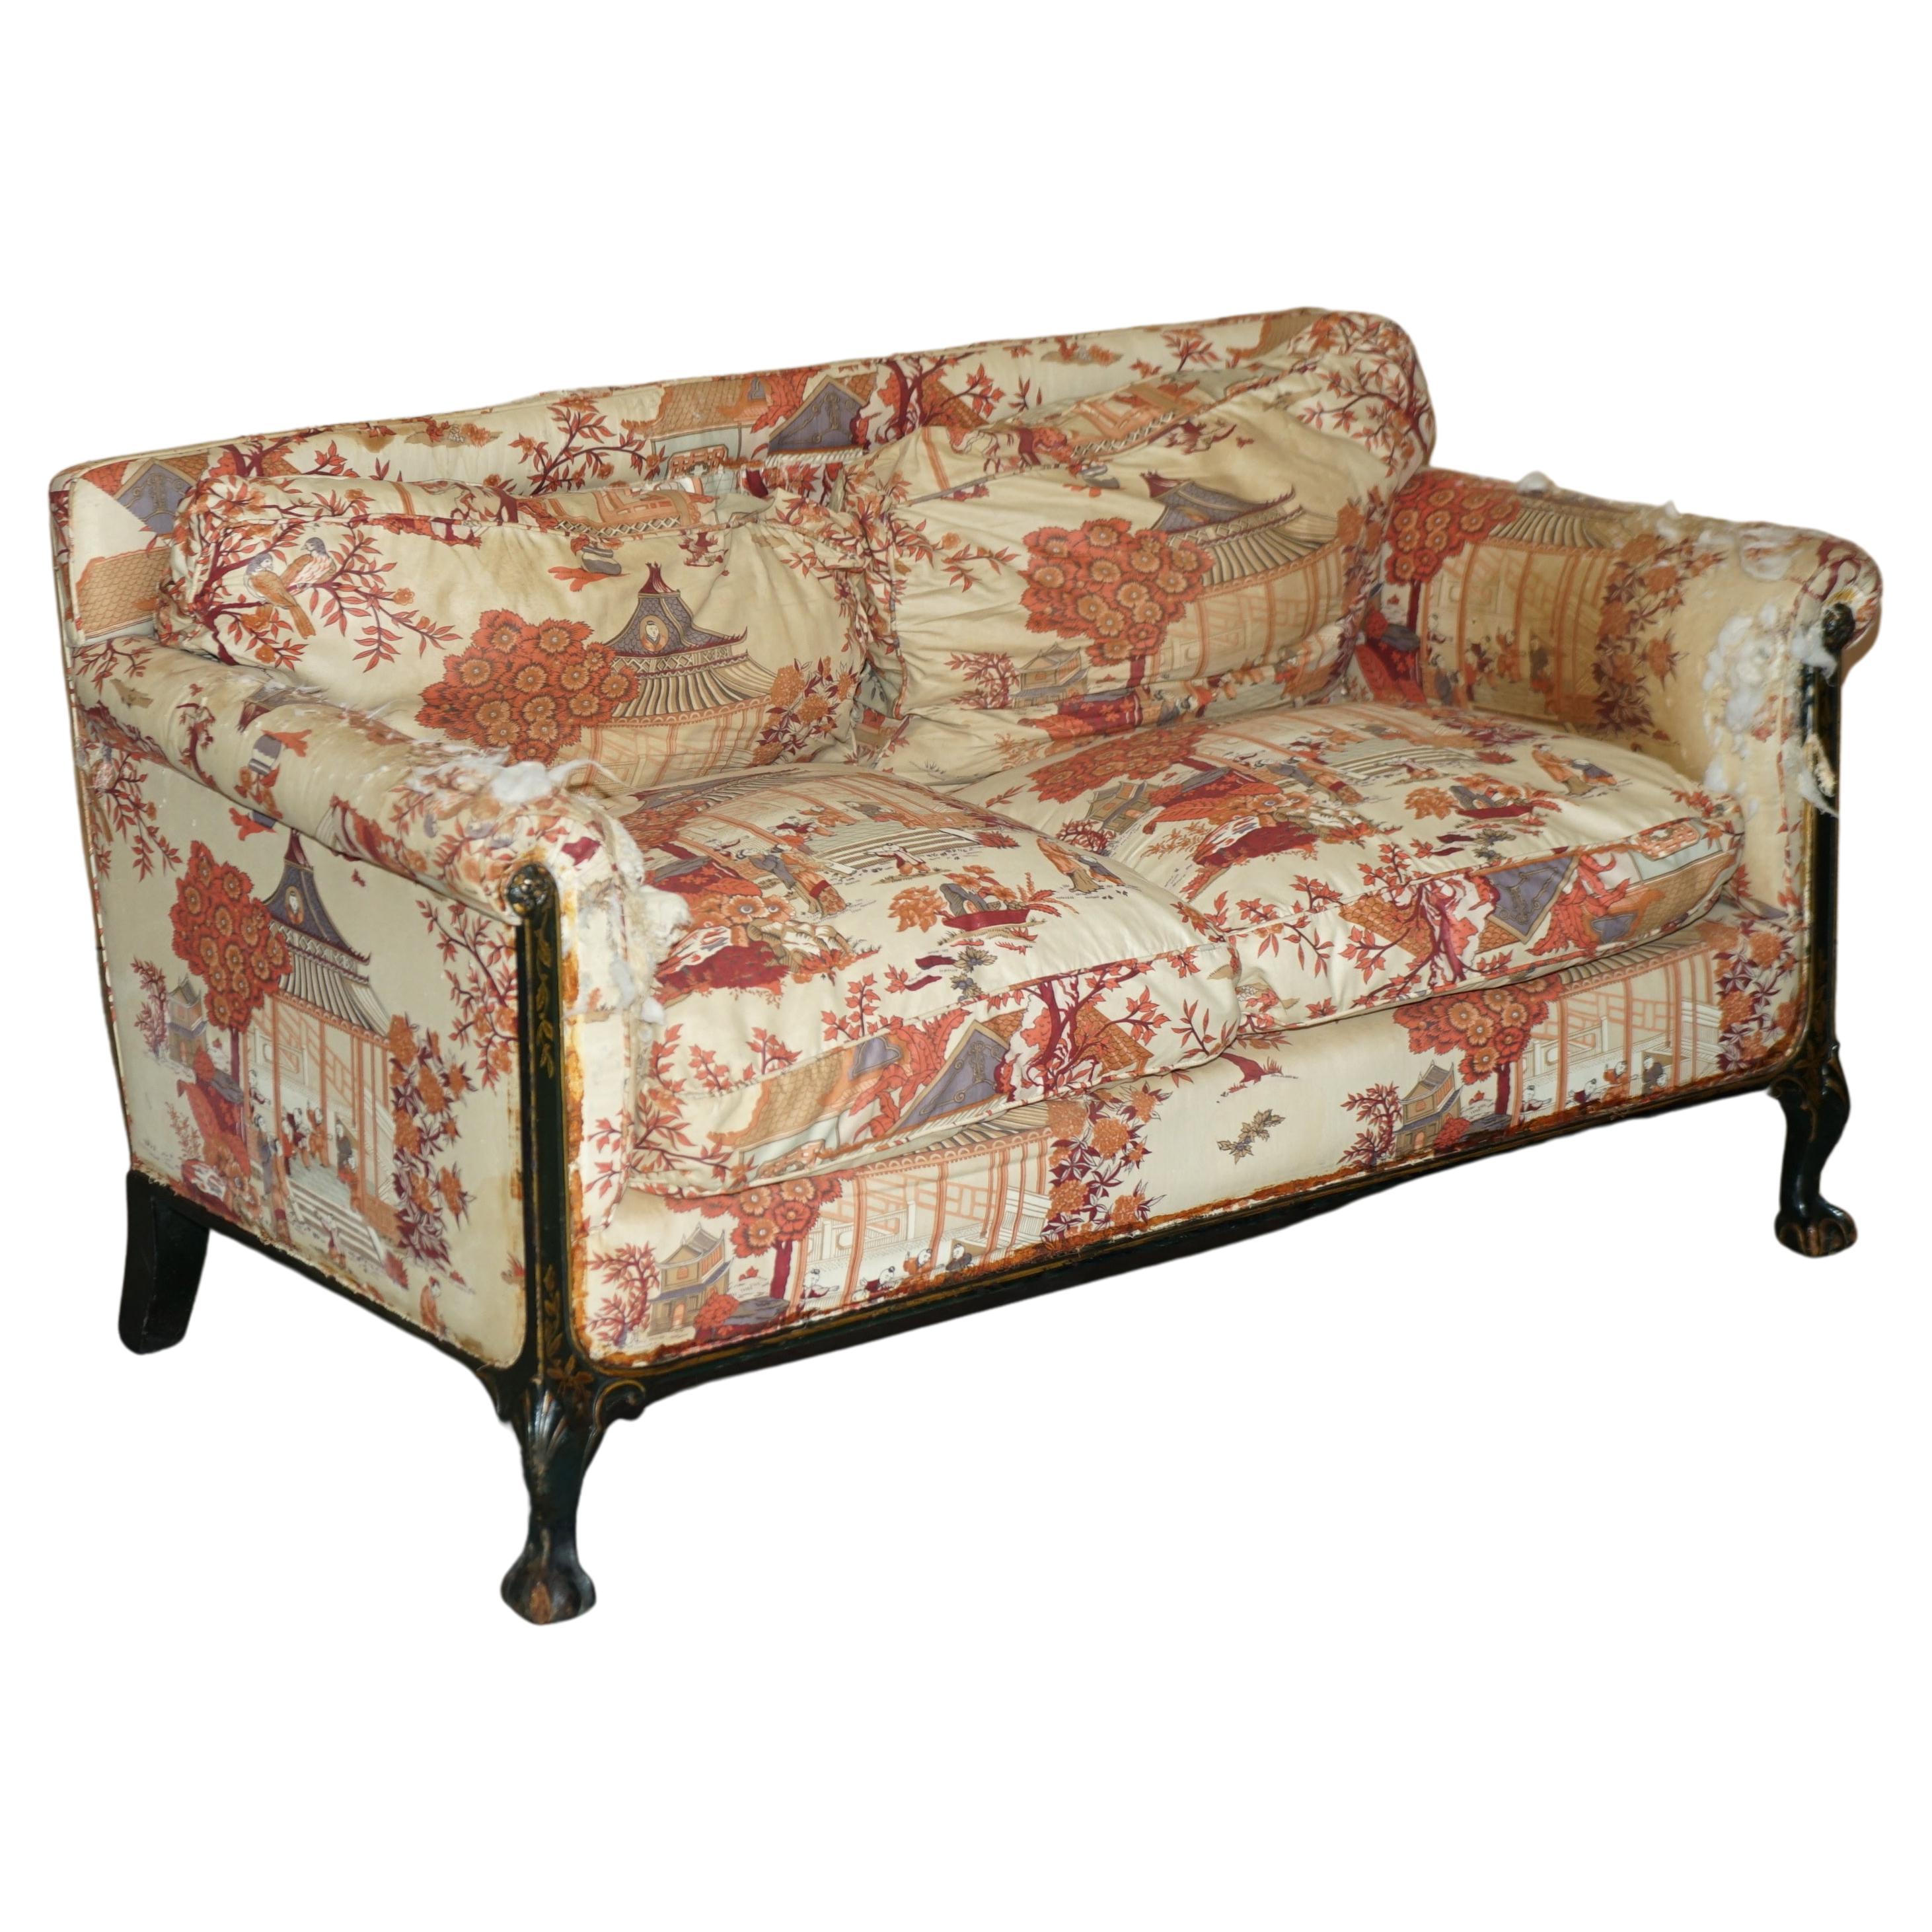 Antique Howard & Sons Aesthetic Movement Sofa Claw & Ball Feet Chinoiserie Fabic For Sale